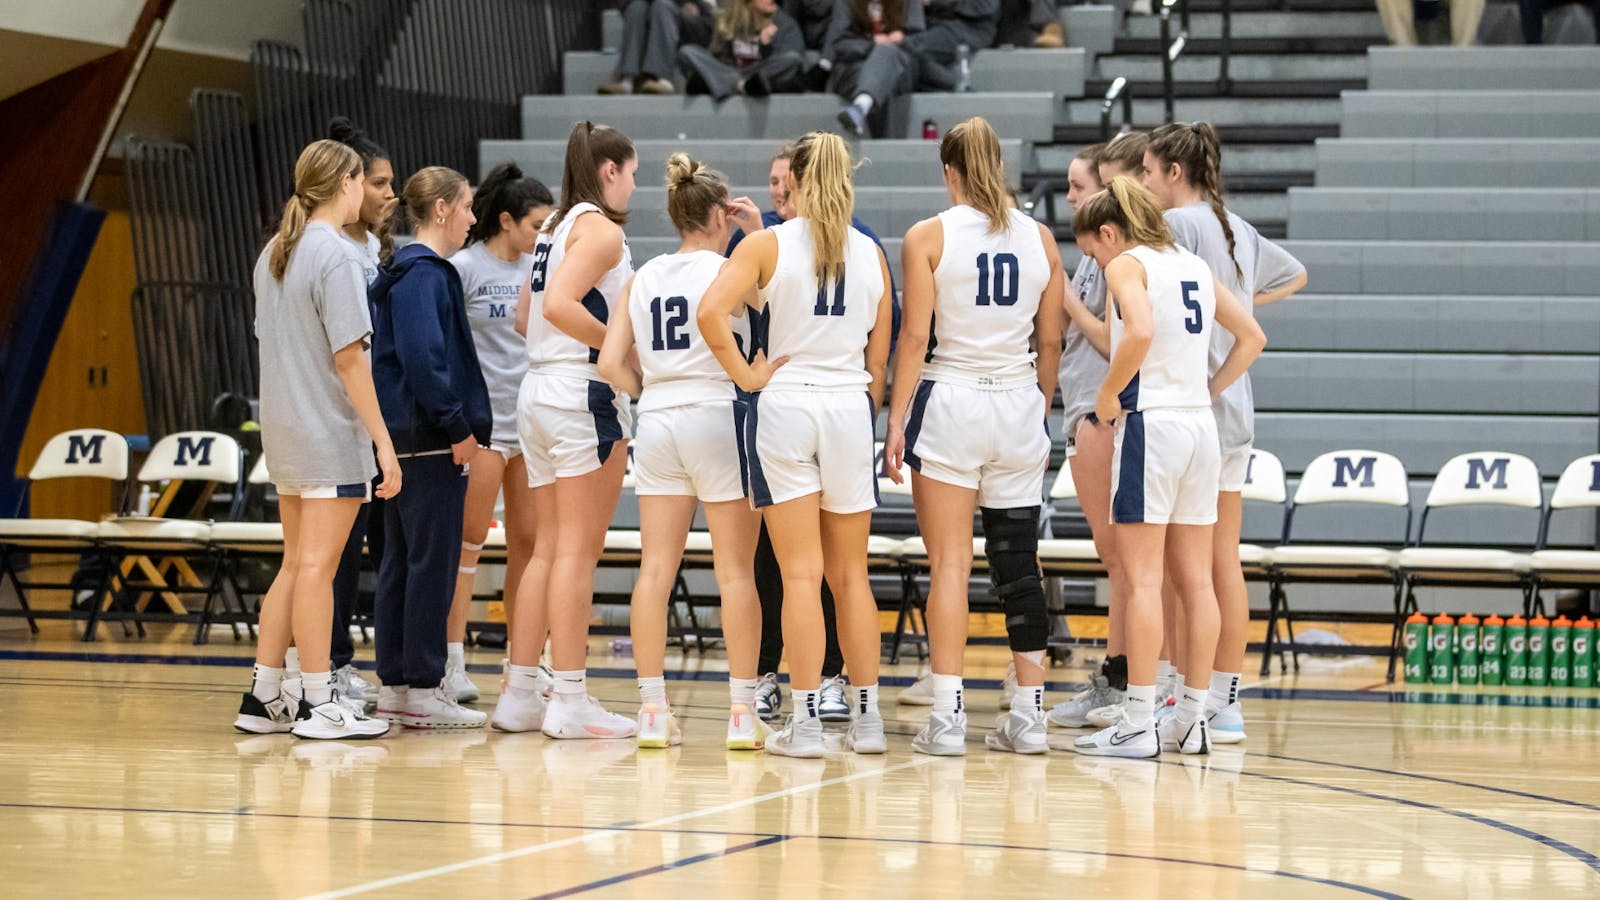 Womens’ basketball gains momentum moving into key conference games – The Middlebury Campus